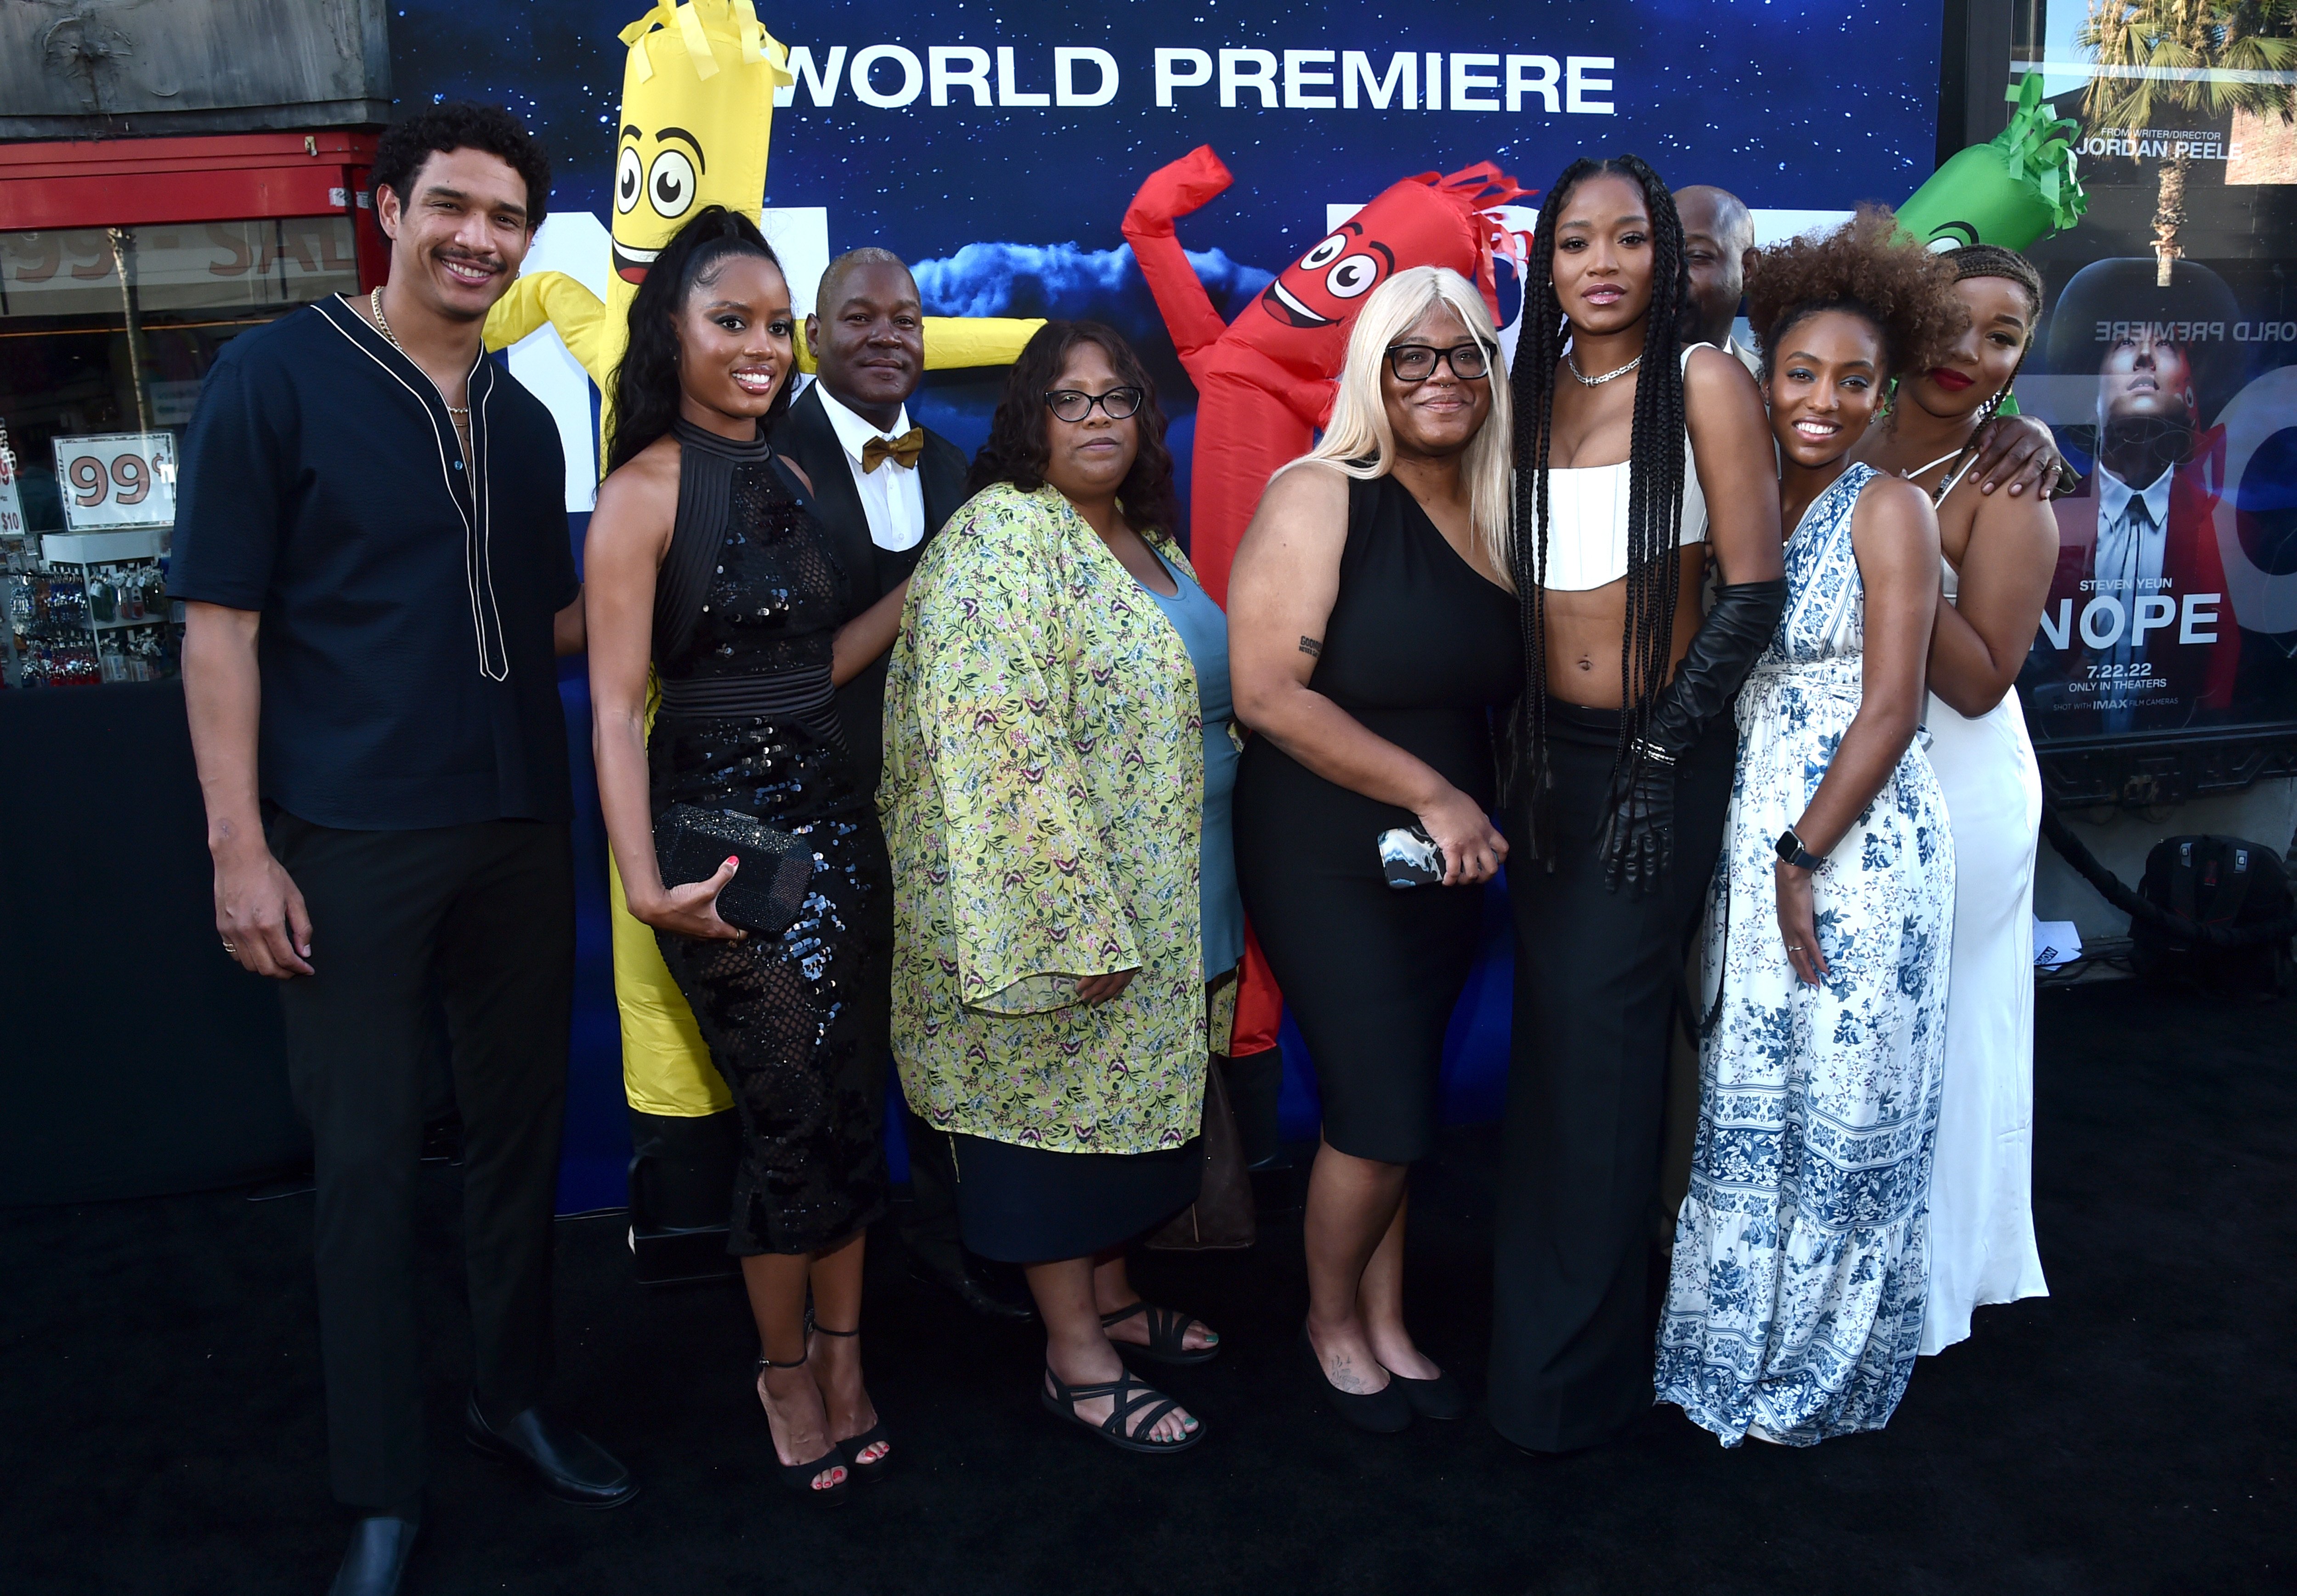 Loreal and Keke Palmer together with their family attend the world premiere of the film "Nope" on July 18, 2022, in Hollywood, California. | Source: Getty Images